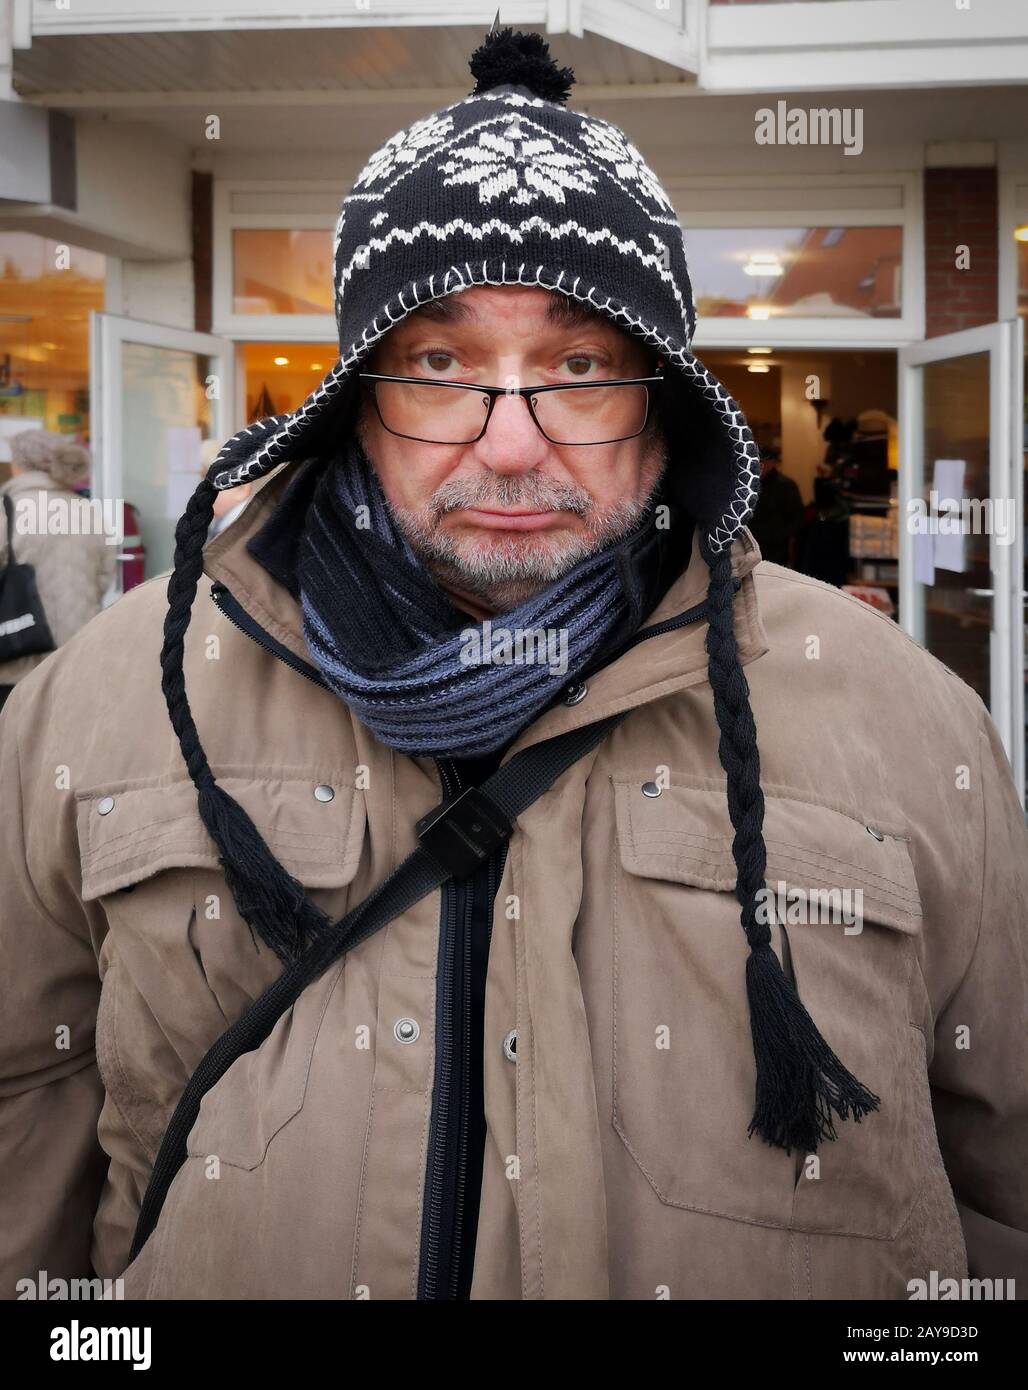 Old man with a grumpy look and knitted hat. Stock Photo